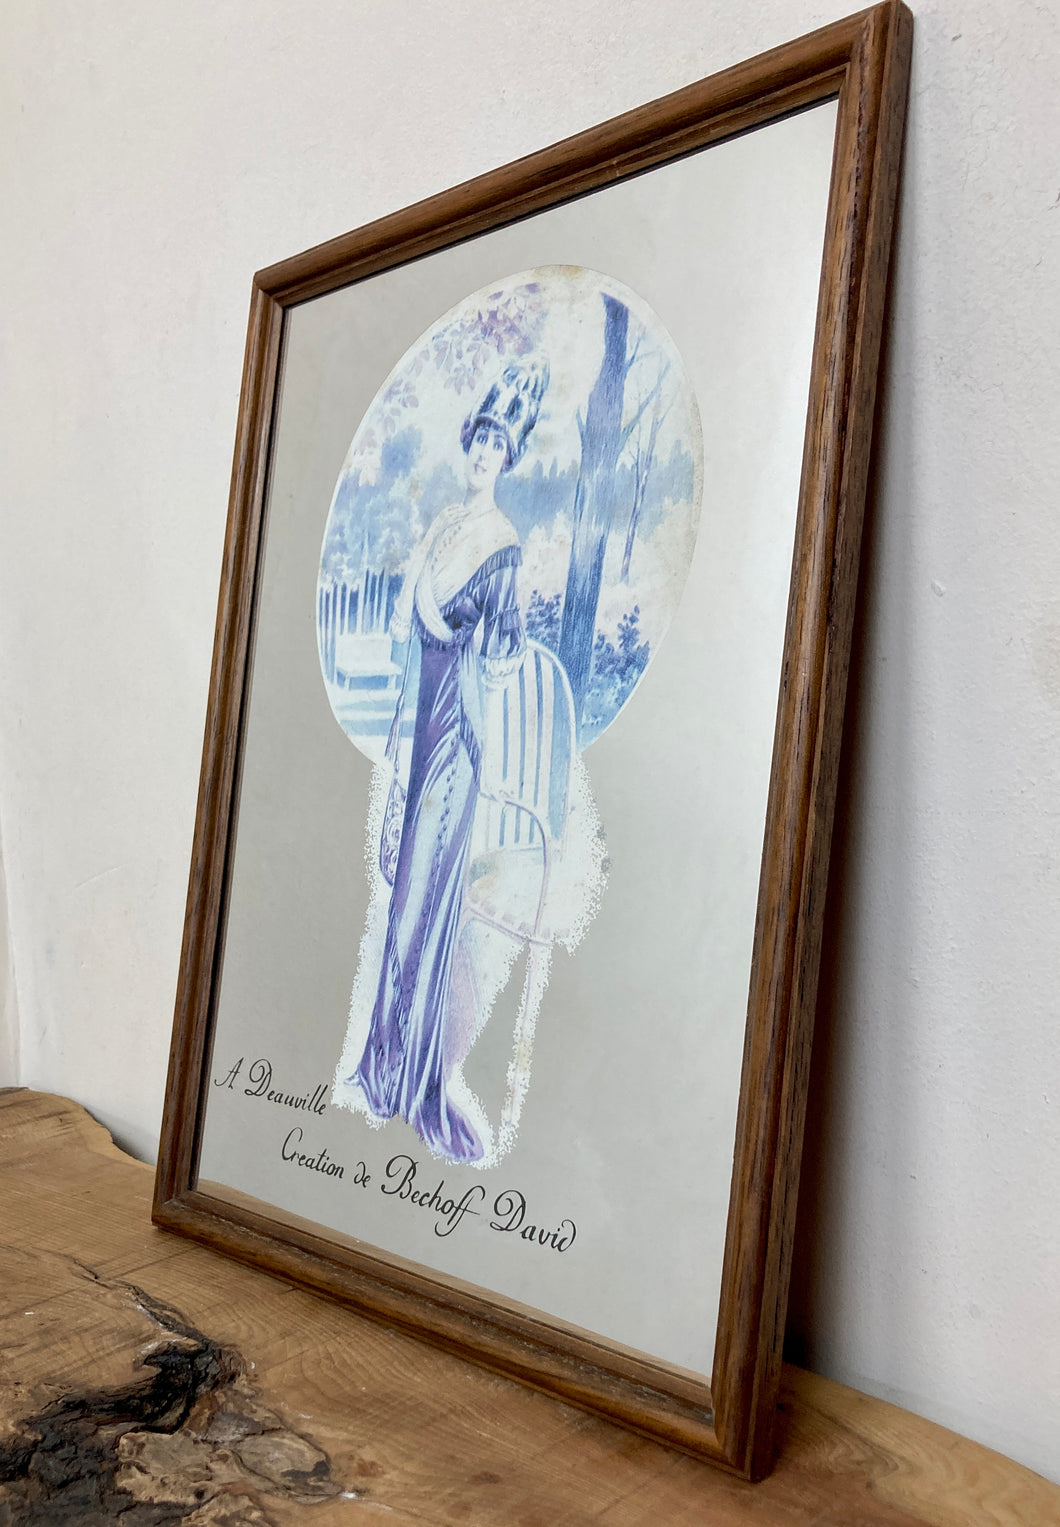 Stunning vintage French art nouveau advertising lady mirror collectibles piece